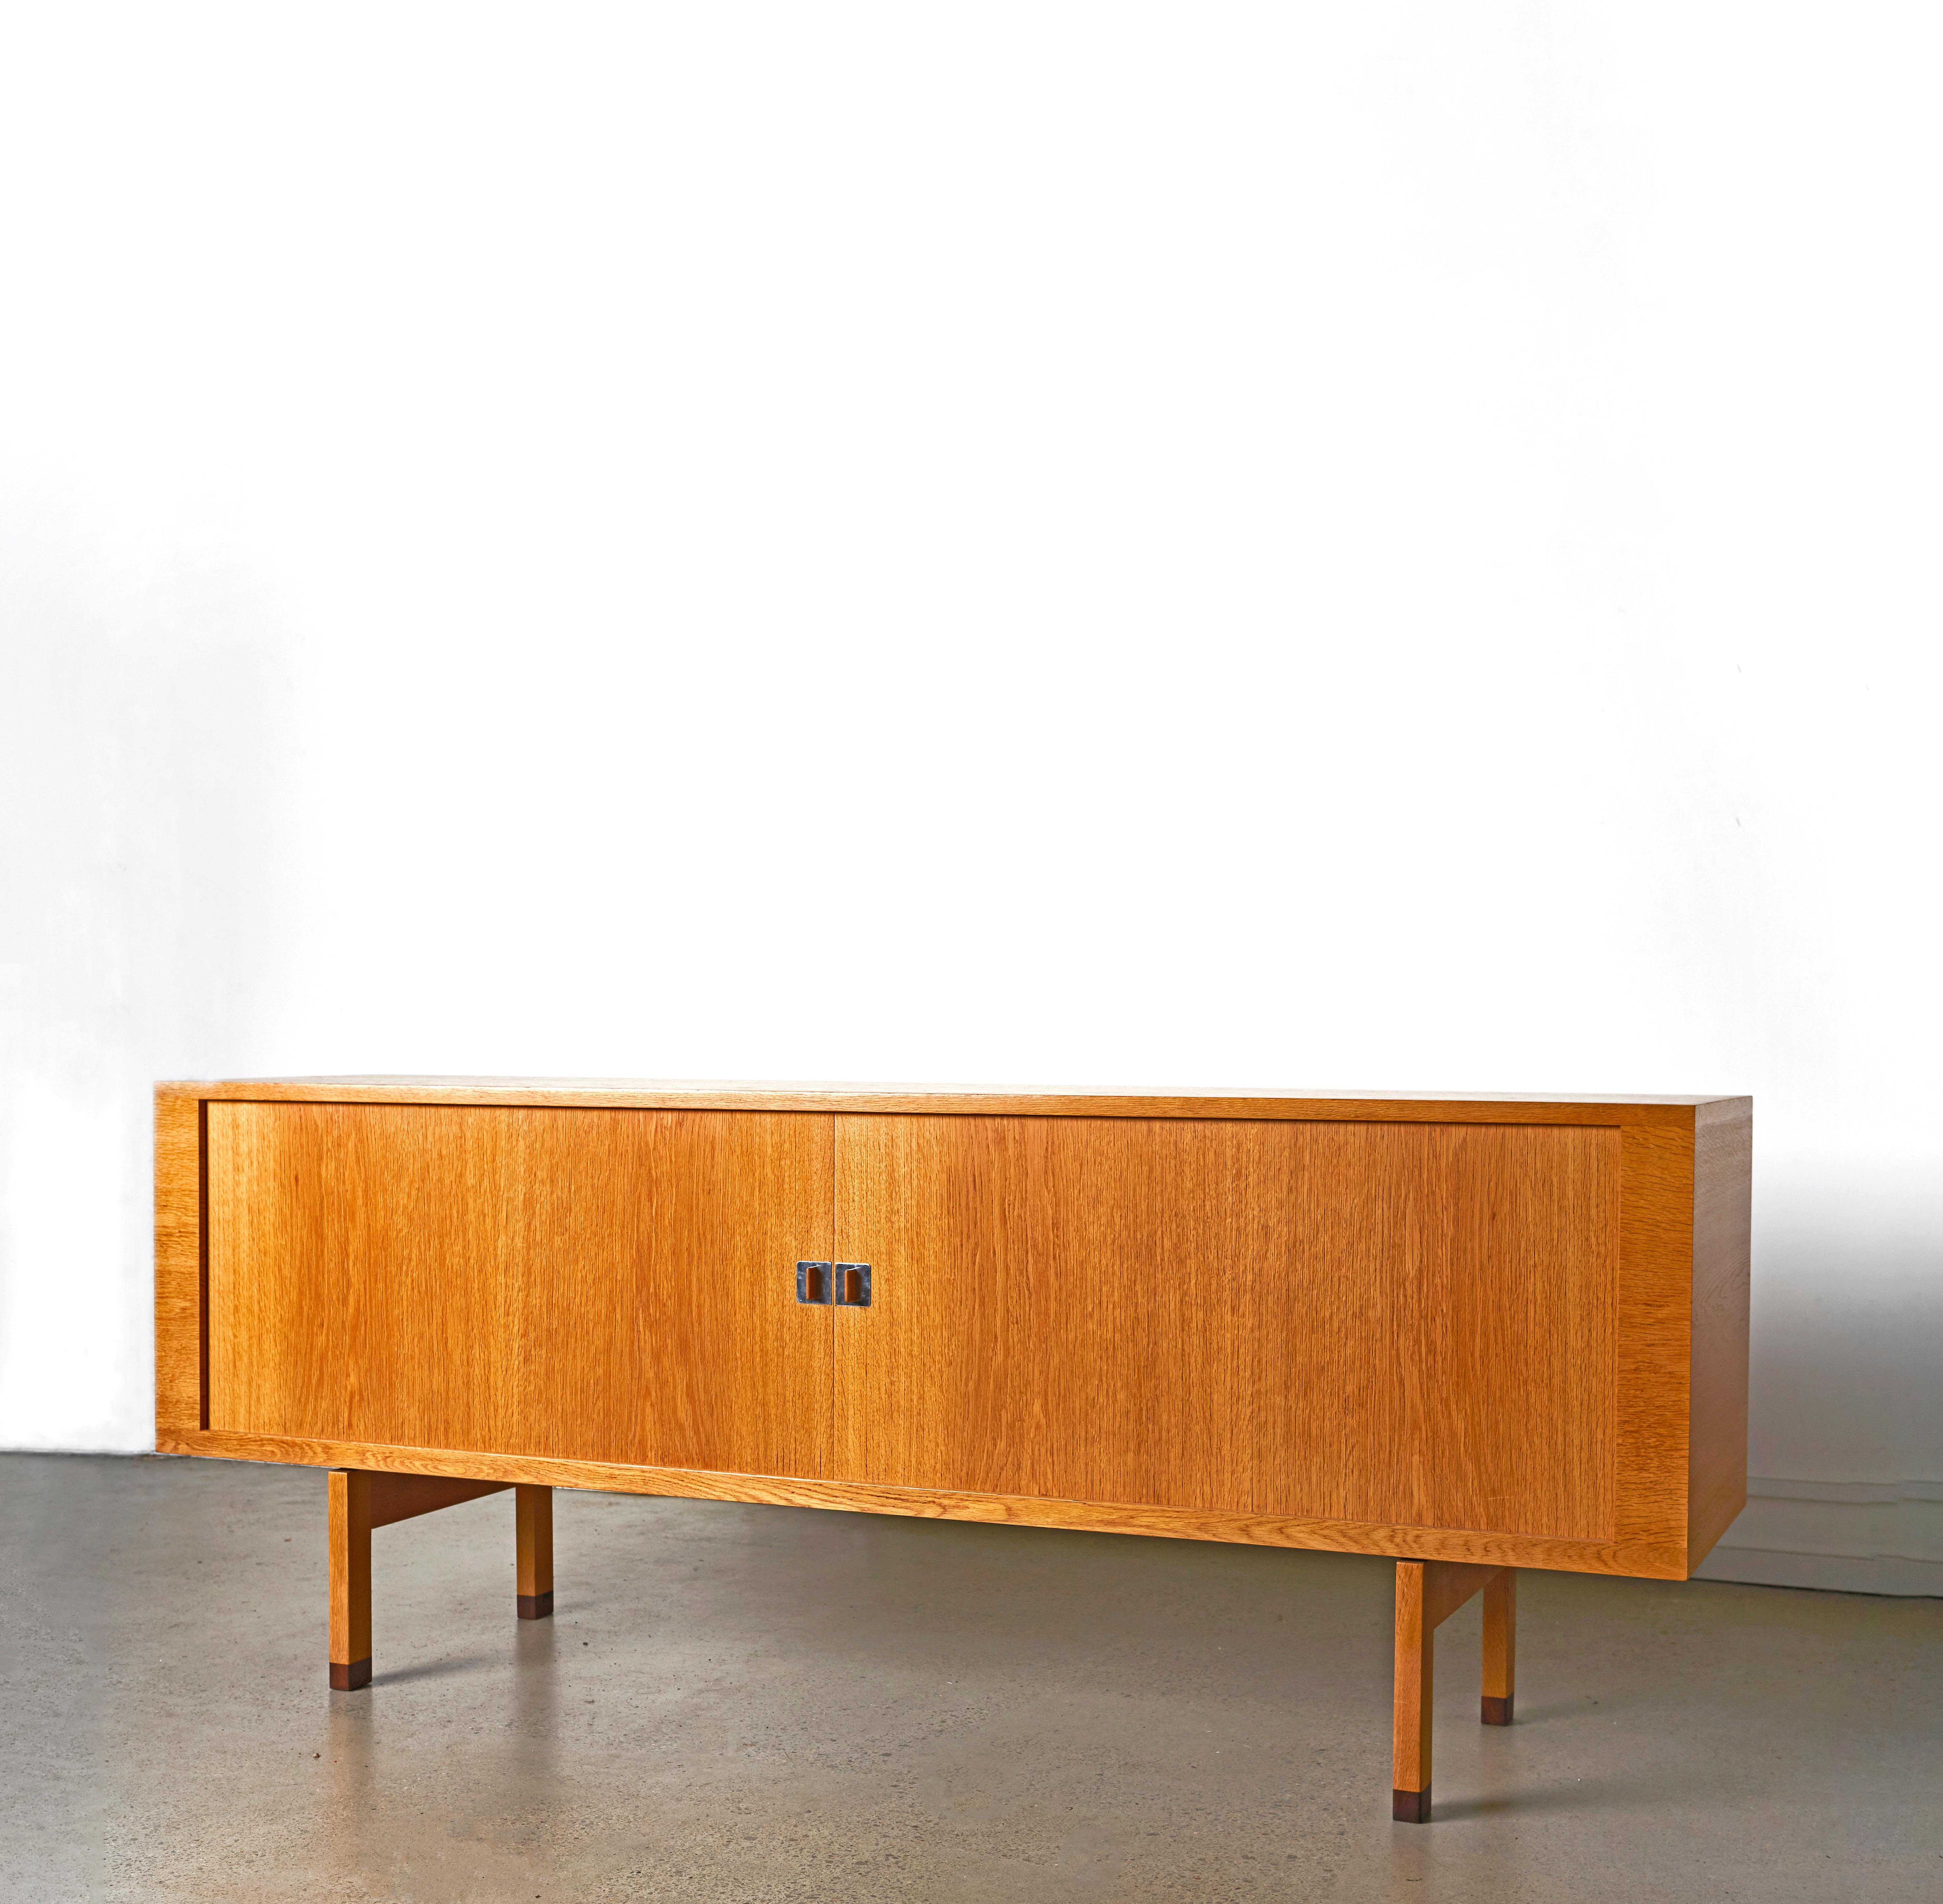 Rare and incredibly beautiful sideboard model RY-25 / President designed by Hans Wegner. Produced by Ry møbler in Denmark.

Dimensions:
Length: 200 cm. 
Height: 79 cm
Depth: 49 cm

Materials: Patinated Oak
Place of Origin: Denmark
Date of